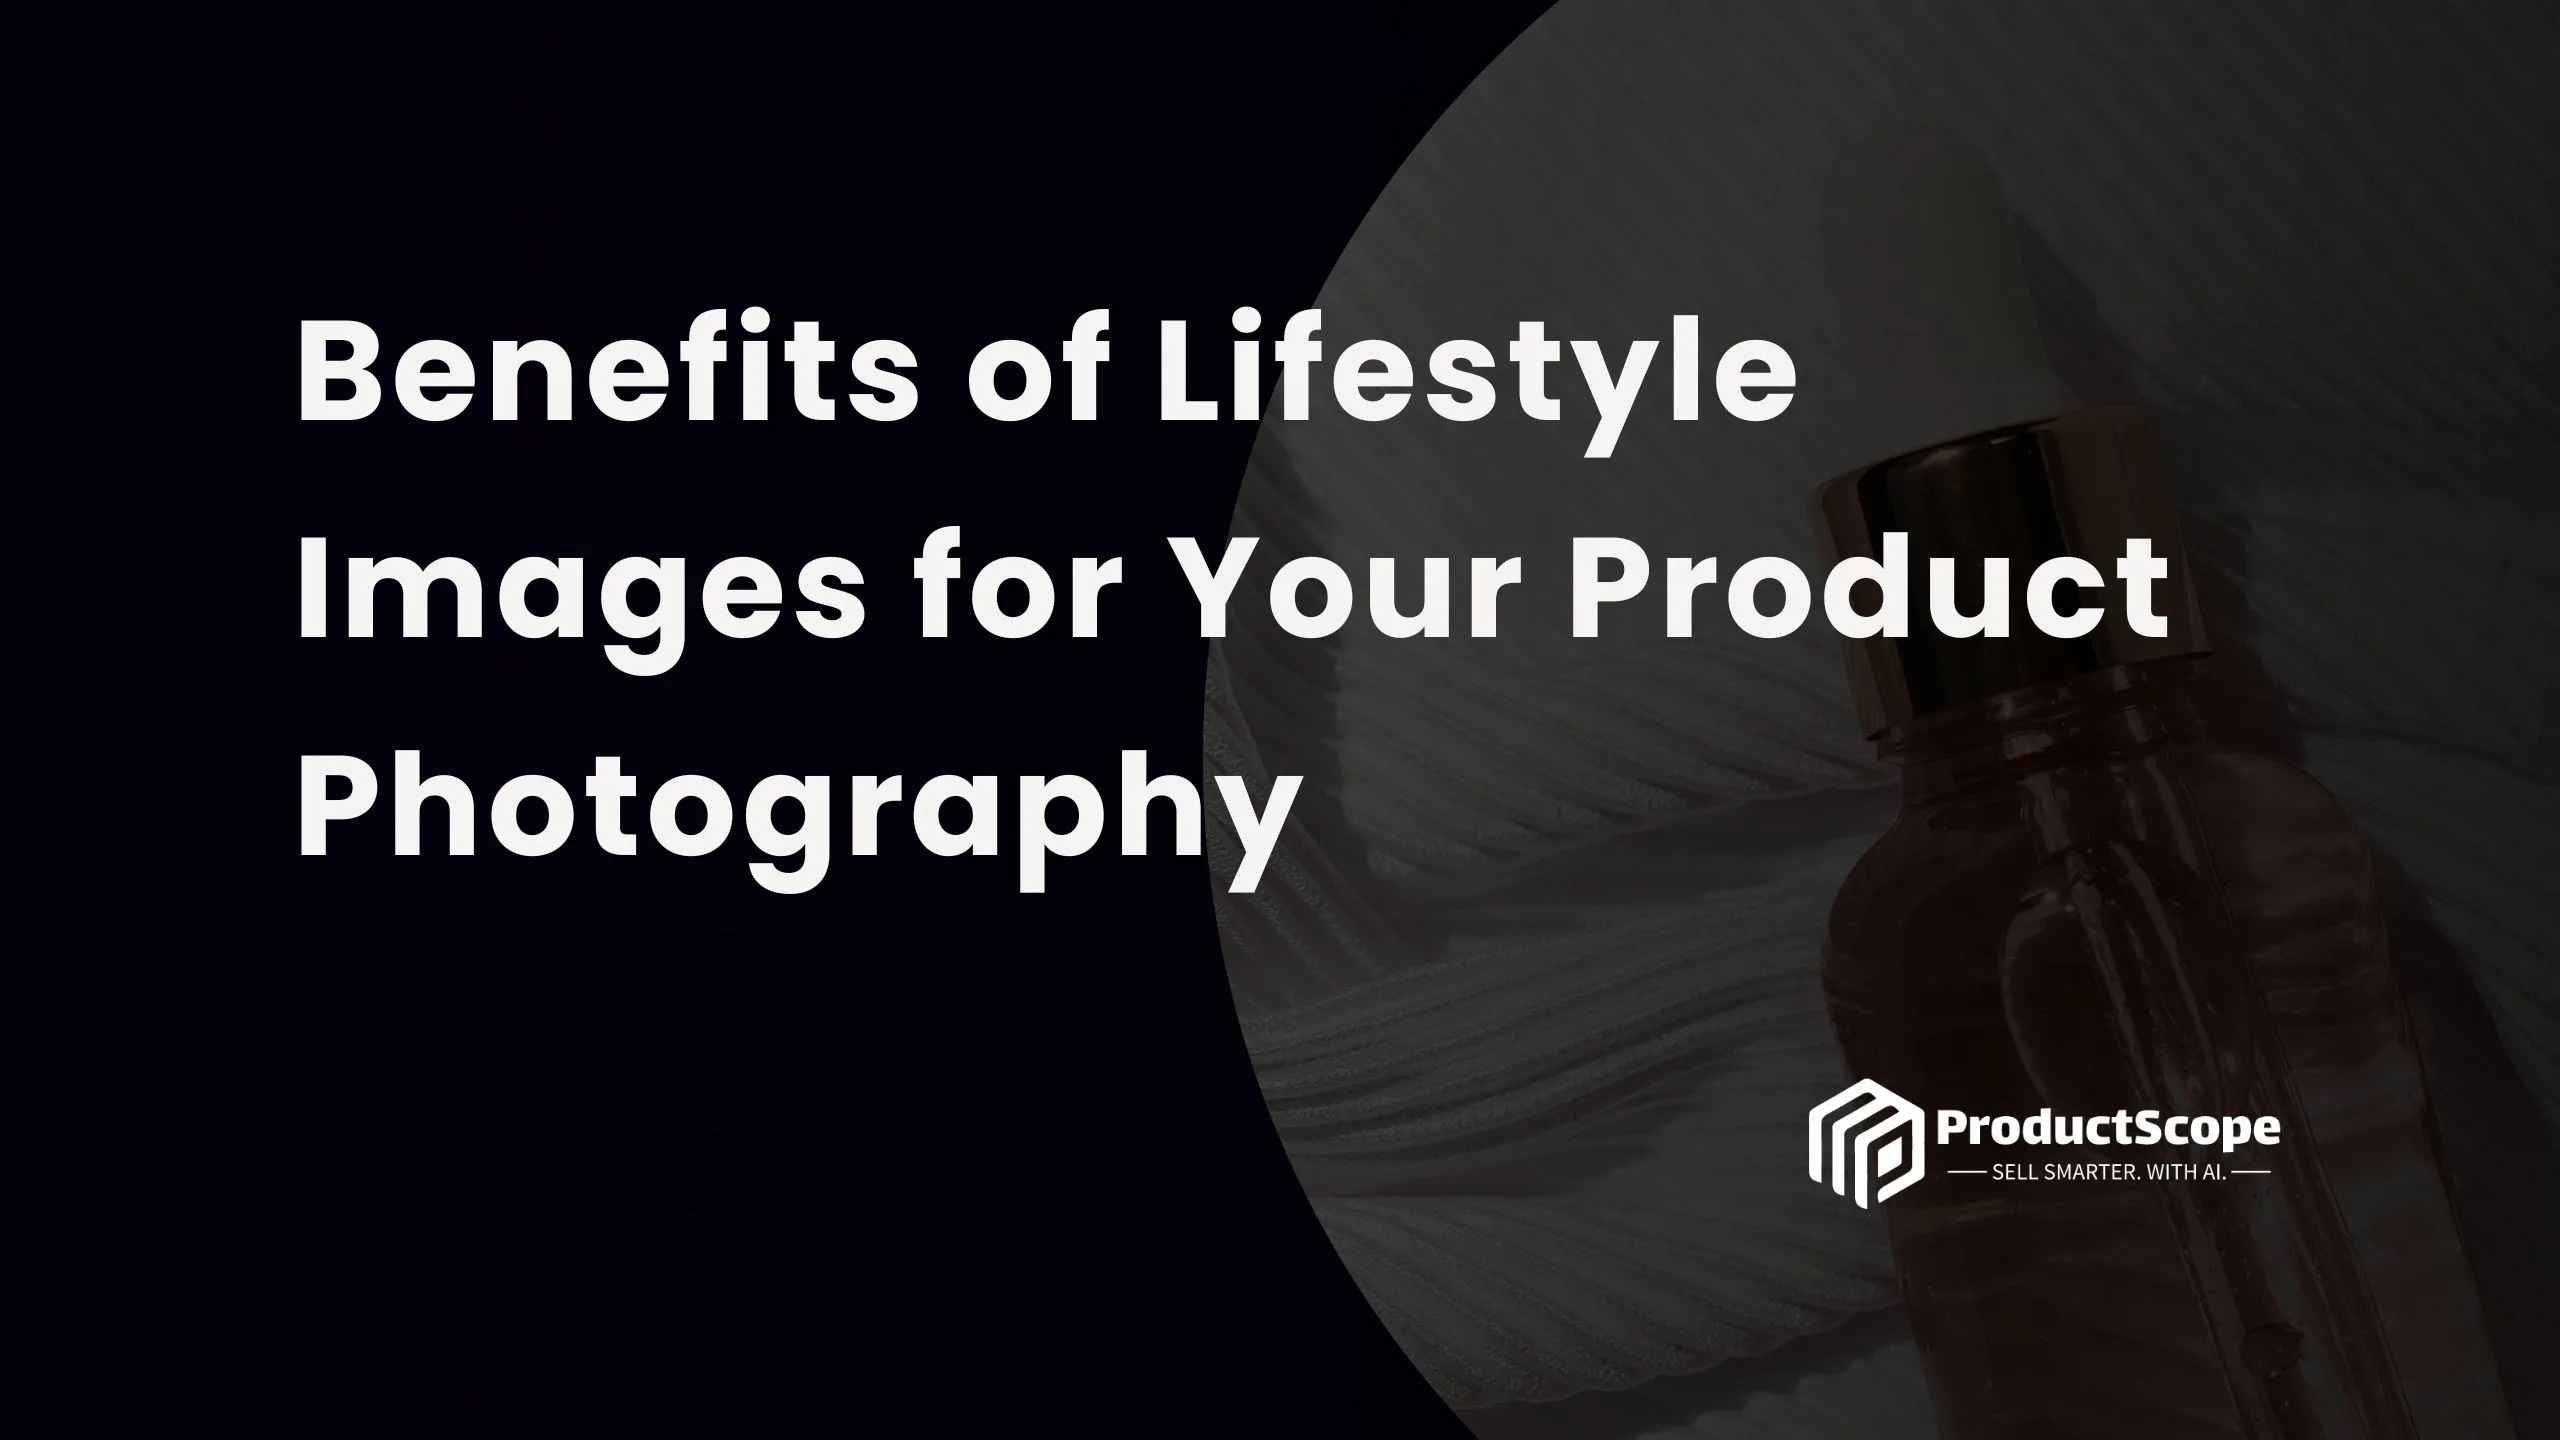 Benefits of Lifestyle Images for Your Product Photography